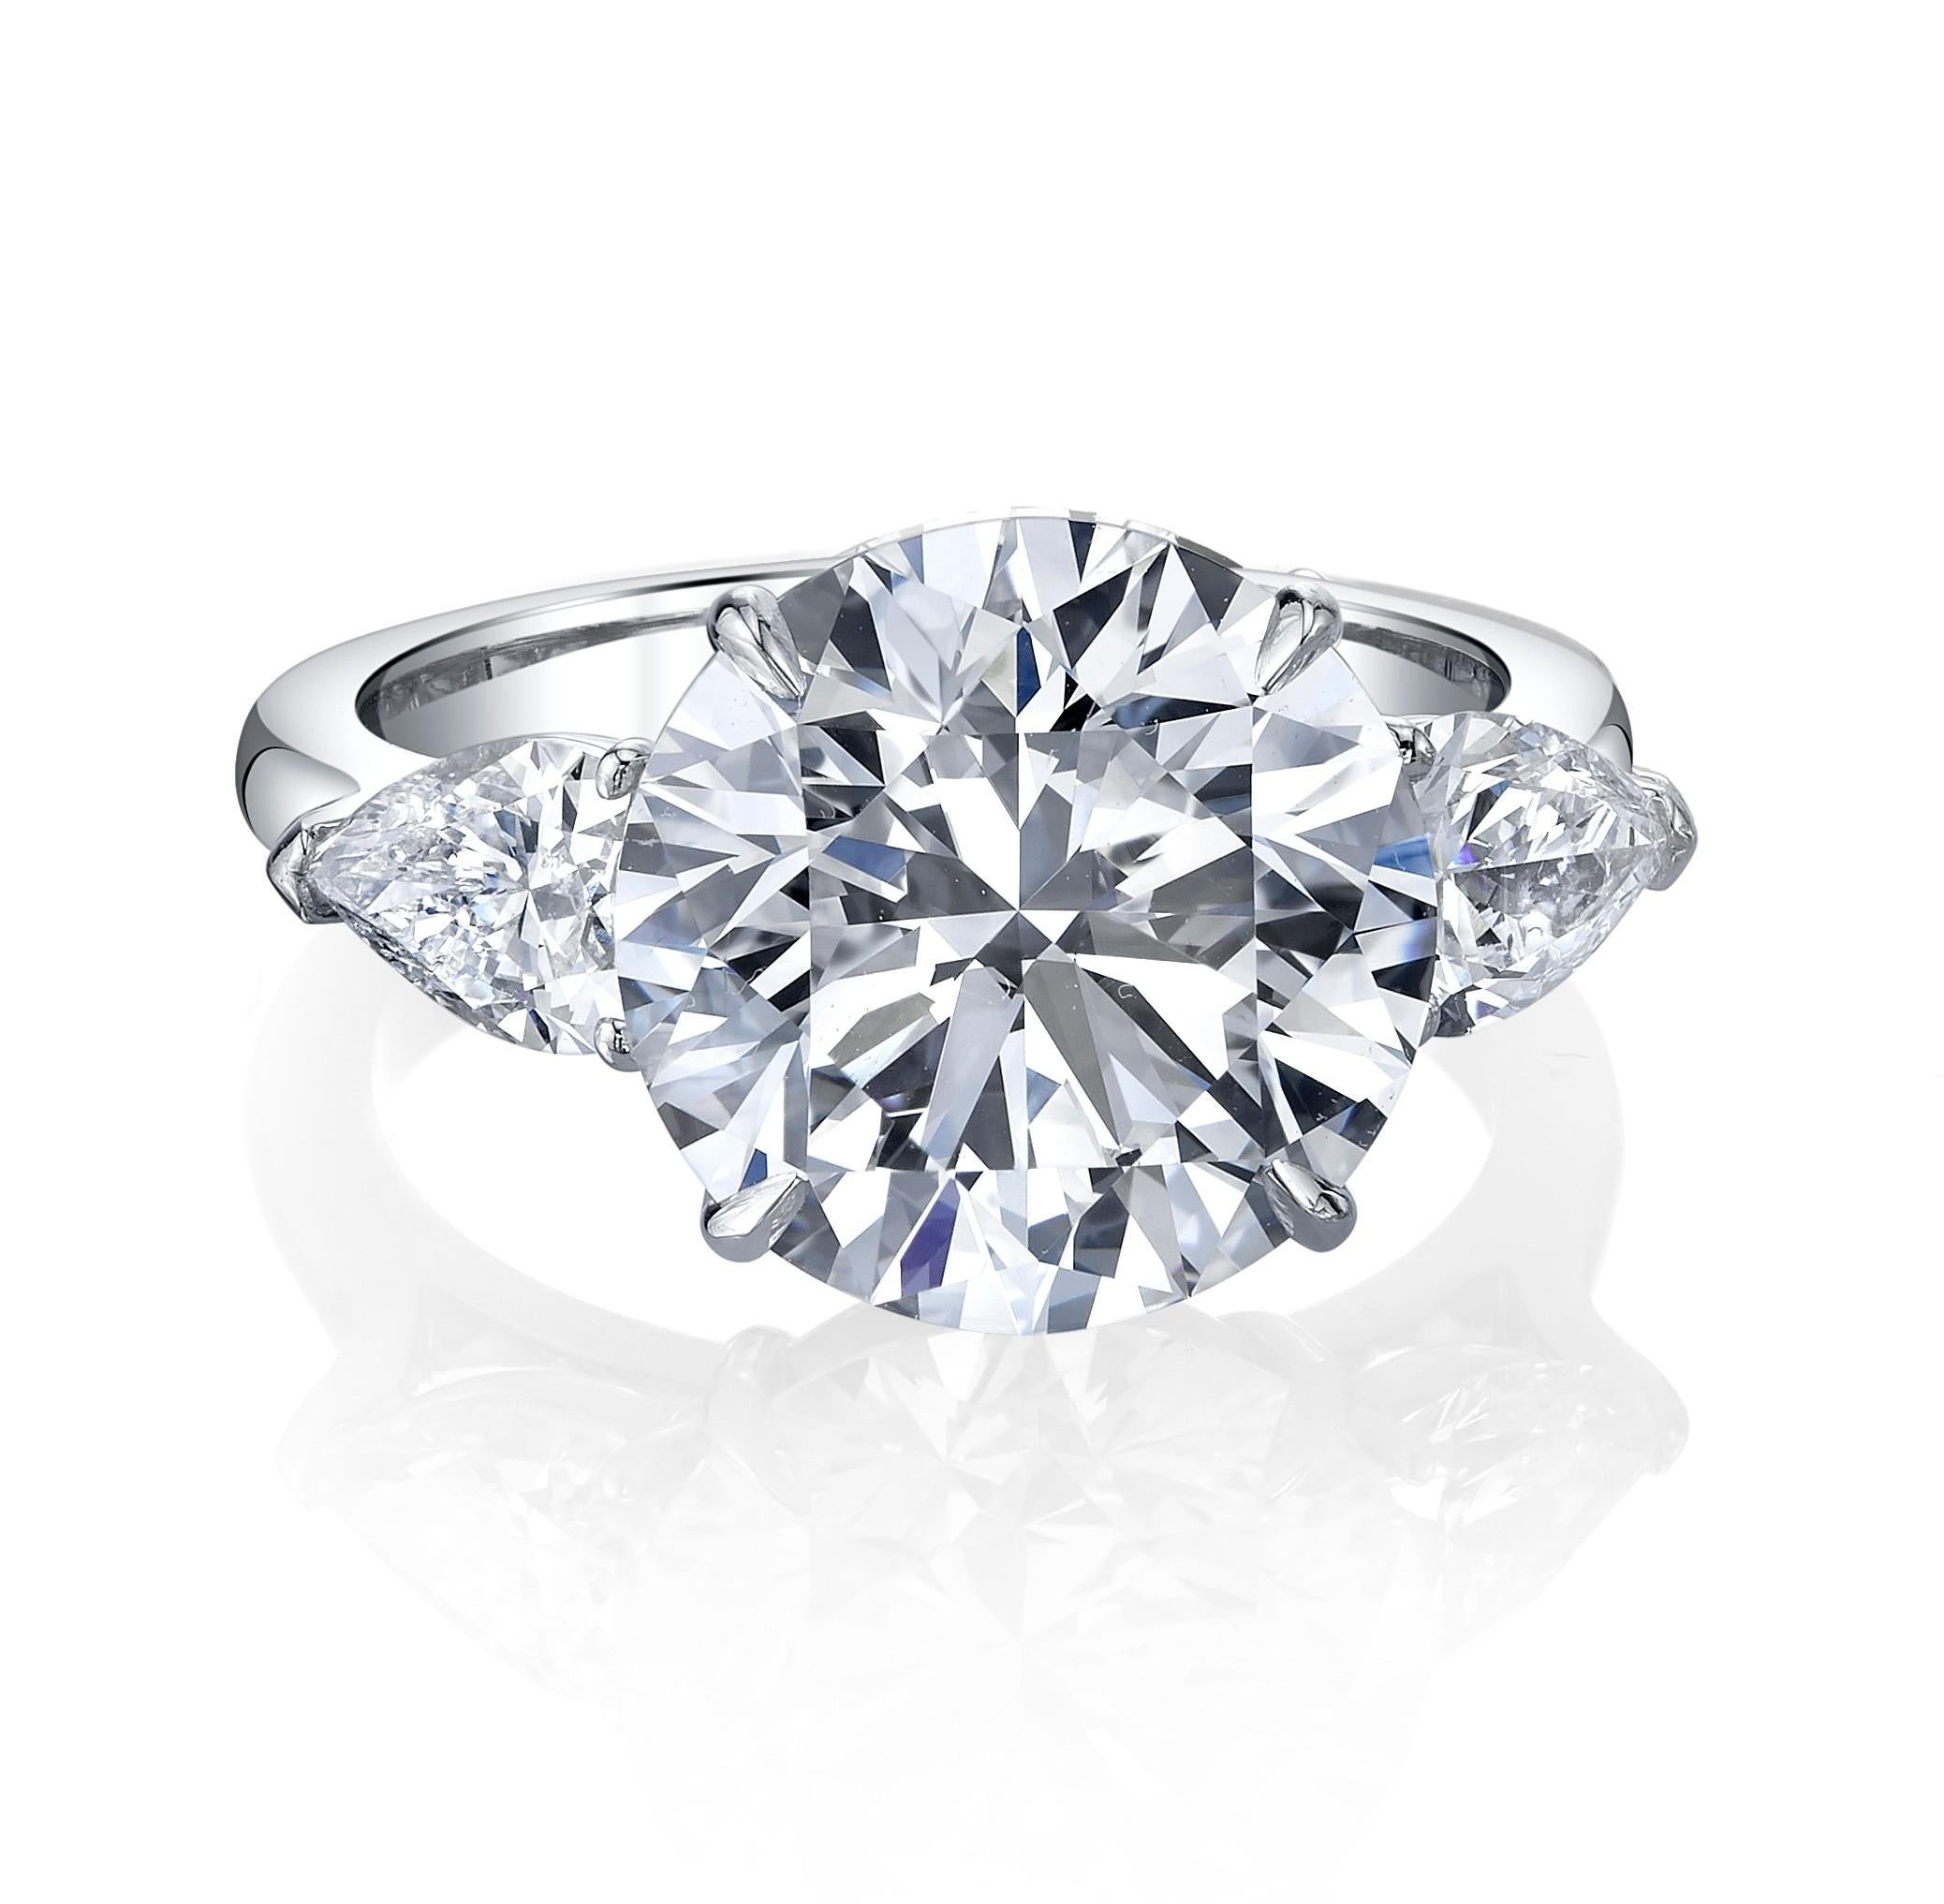 A timeless and feminine creation of fine jewelry, the Three Stone Diamond Engagement Ring is a true testament to engagement legacy and passion for diamonds. The simple setting enhances a diamond’s natural beauty and brilliance, without distraction.